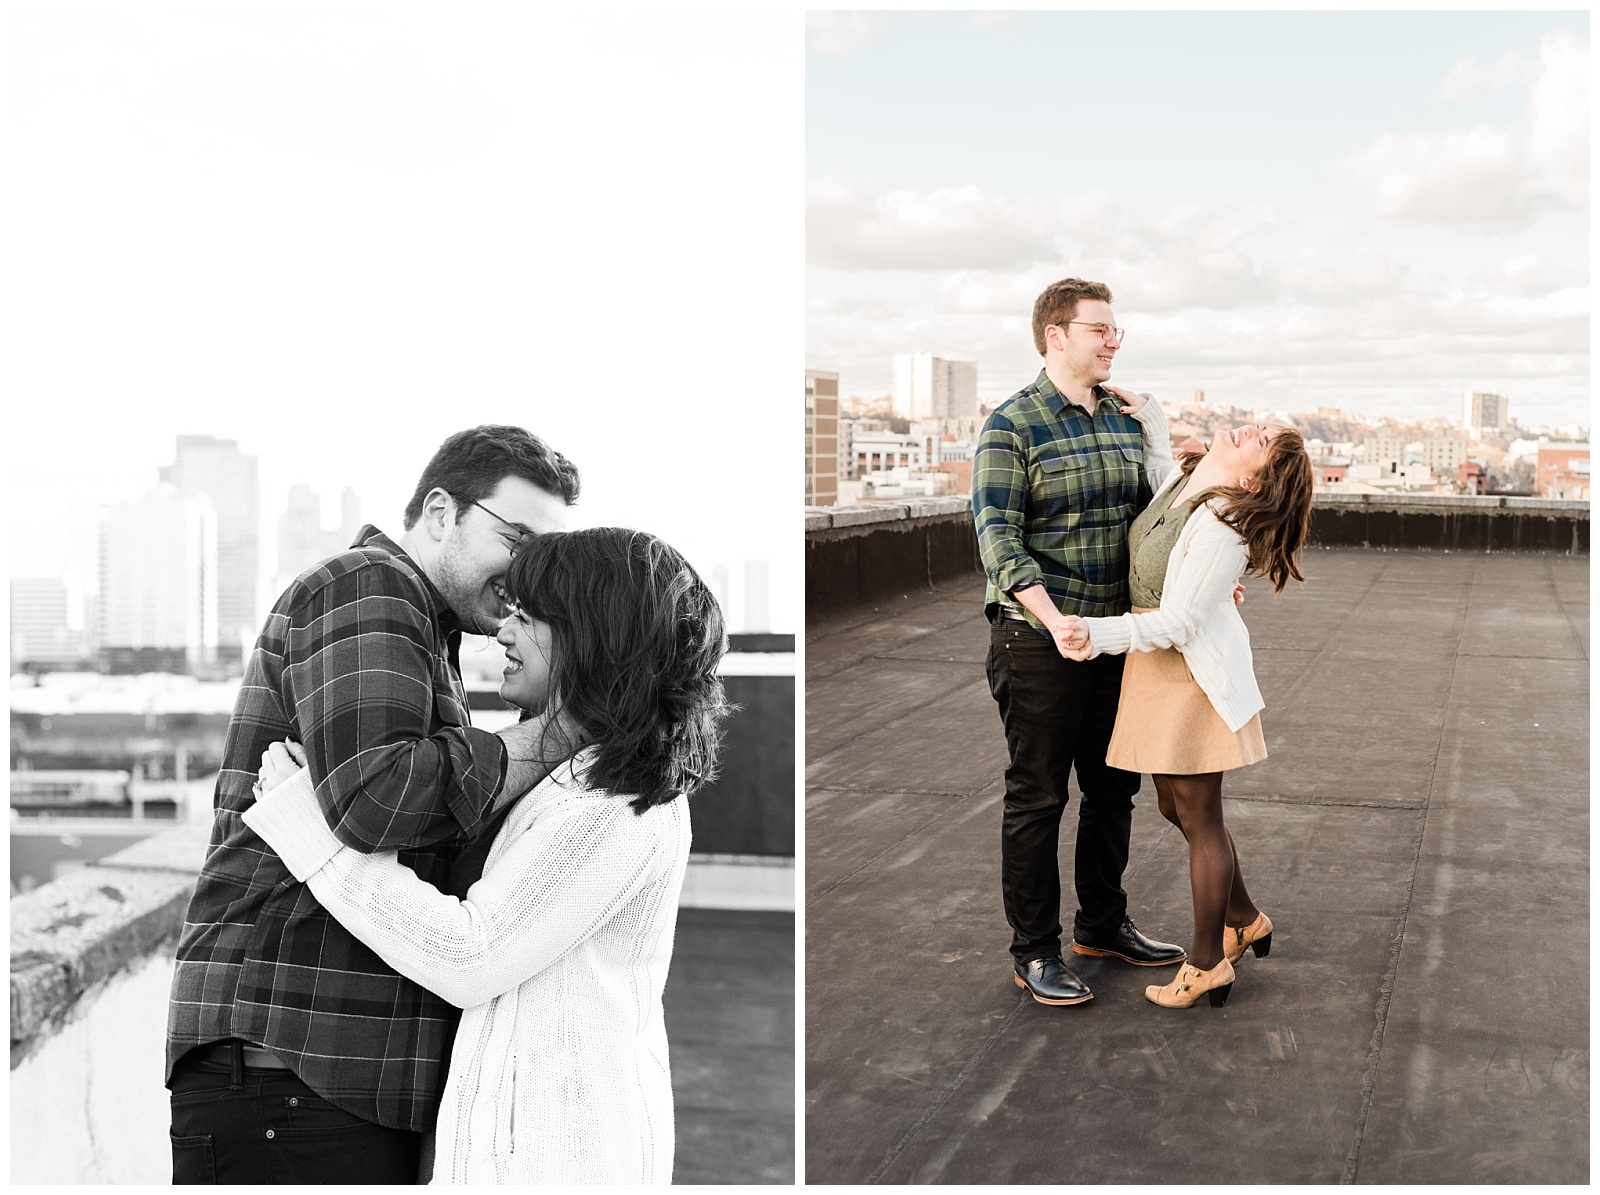 Hoboken, NJ, New Jersey, Rooftop, Engagement Session, Urban, City, Golden Hour, City, Skyline, Laughing